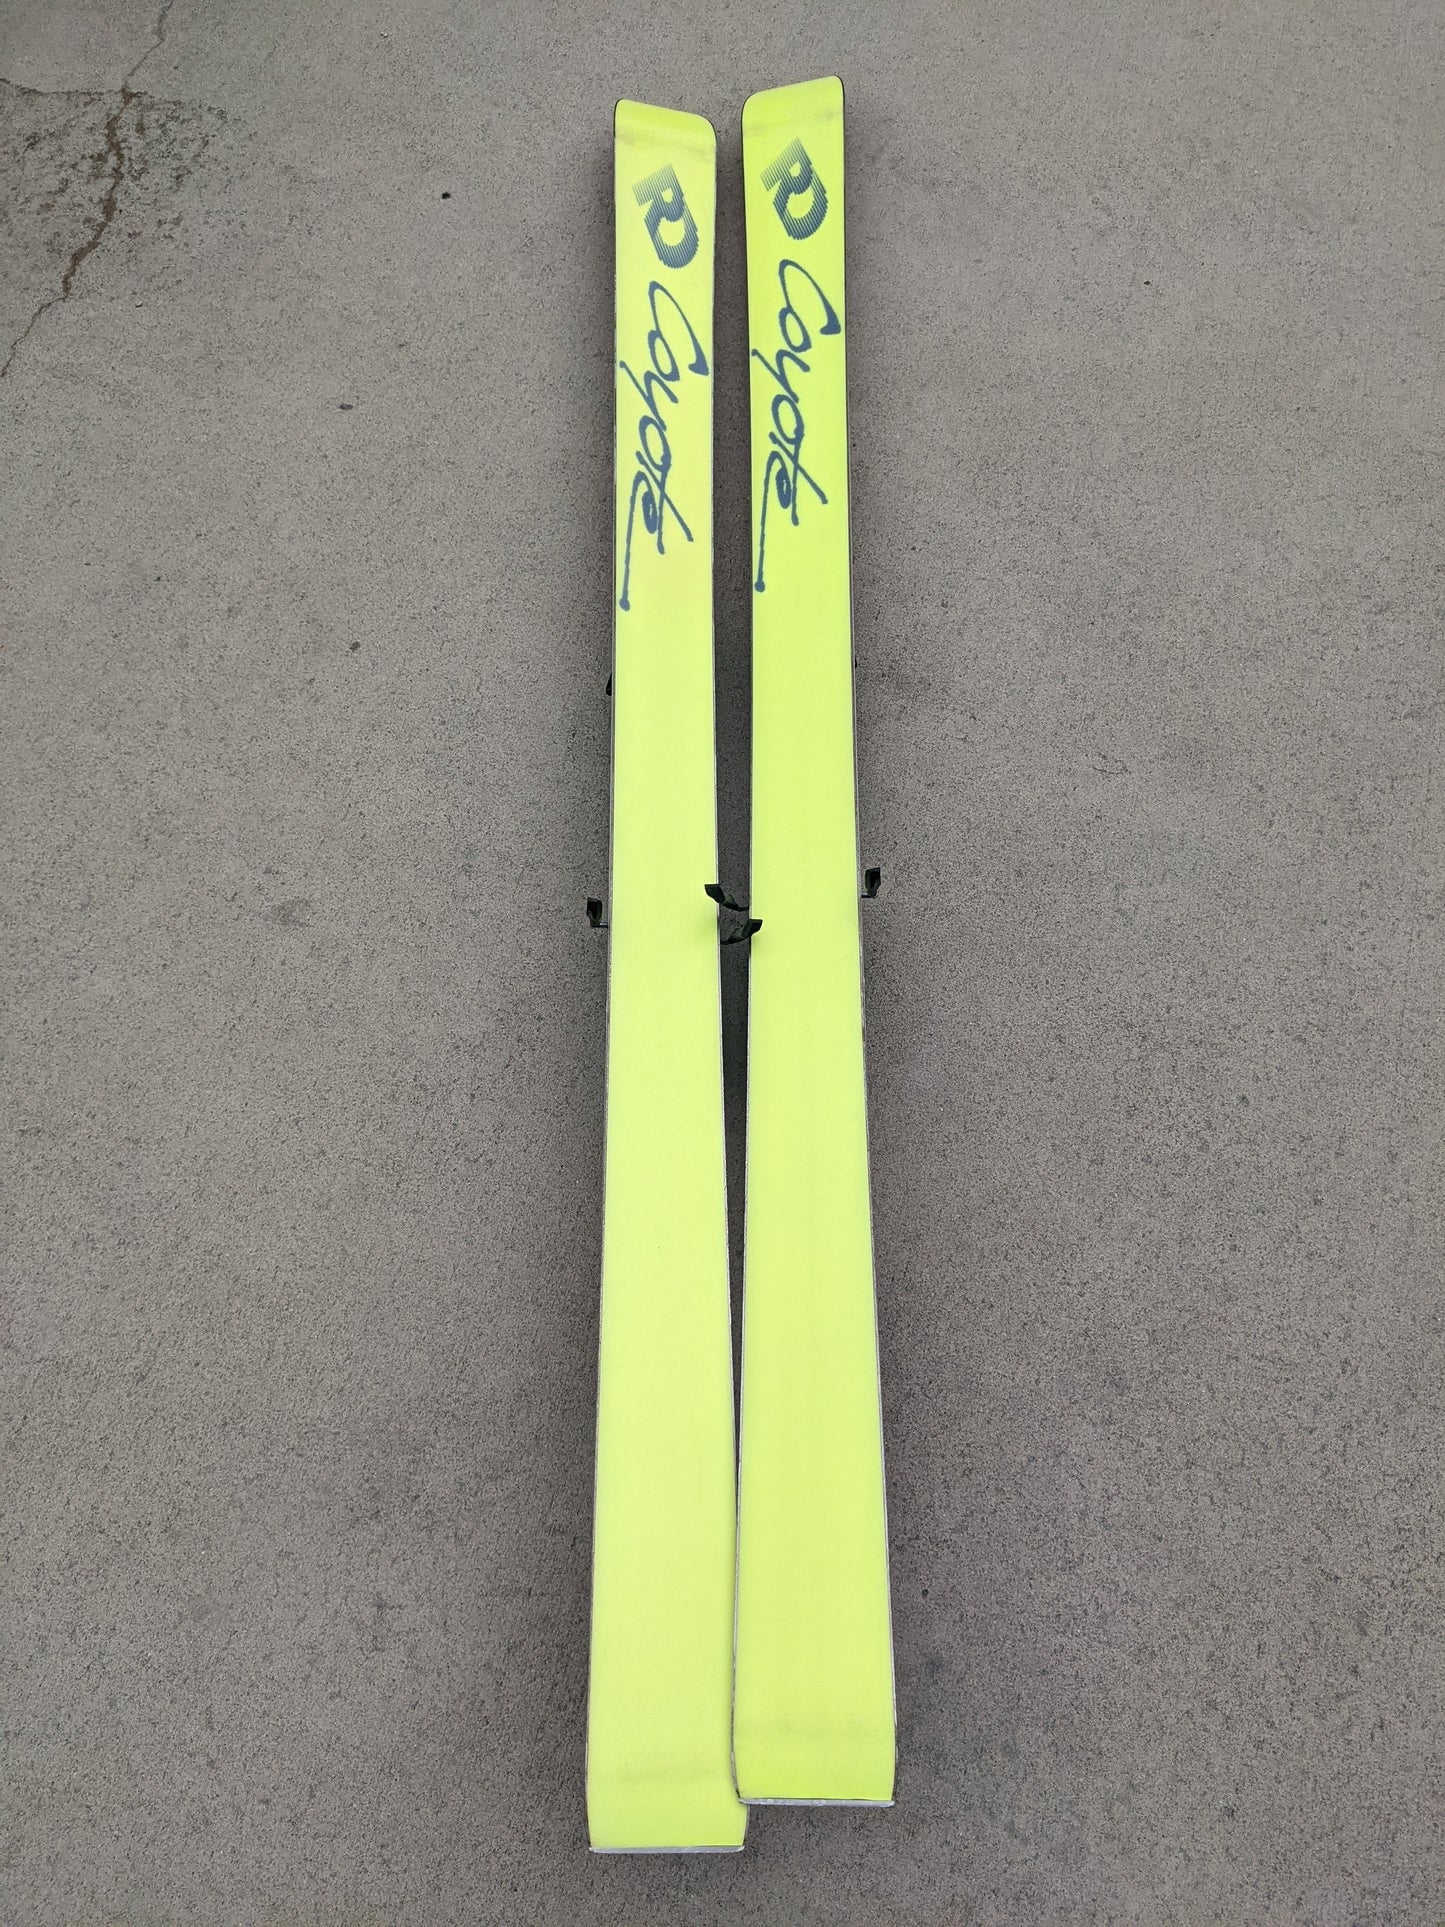 Research Dynamics Coyote Skis w/Marker Bindings Size 184 Cm Color Red Condition Used Consigner Estimates 2018 Original Purchase Date